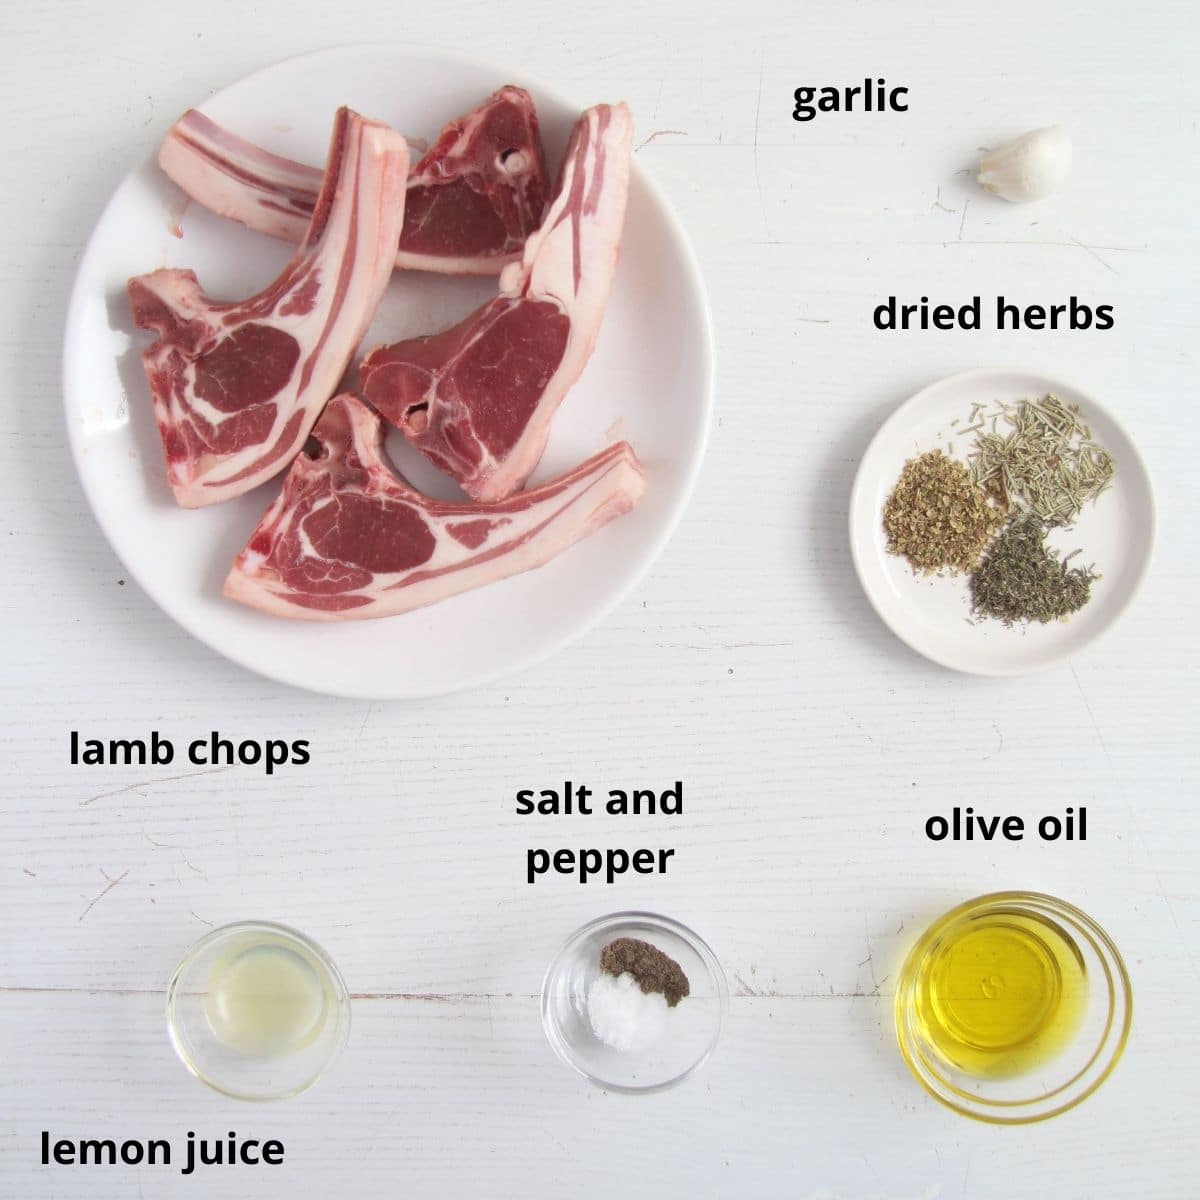 listed ingredients for fryng lamb chops on the table.